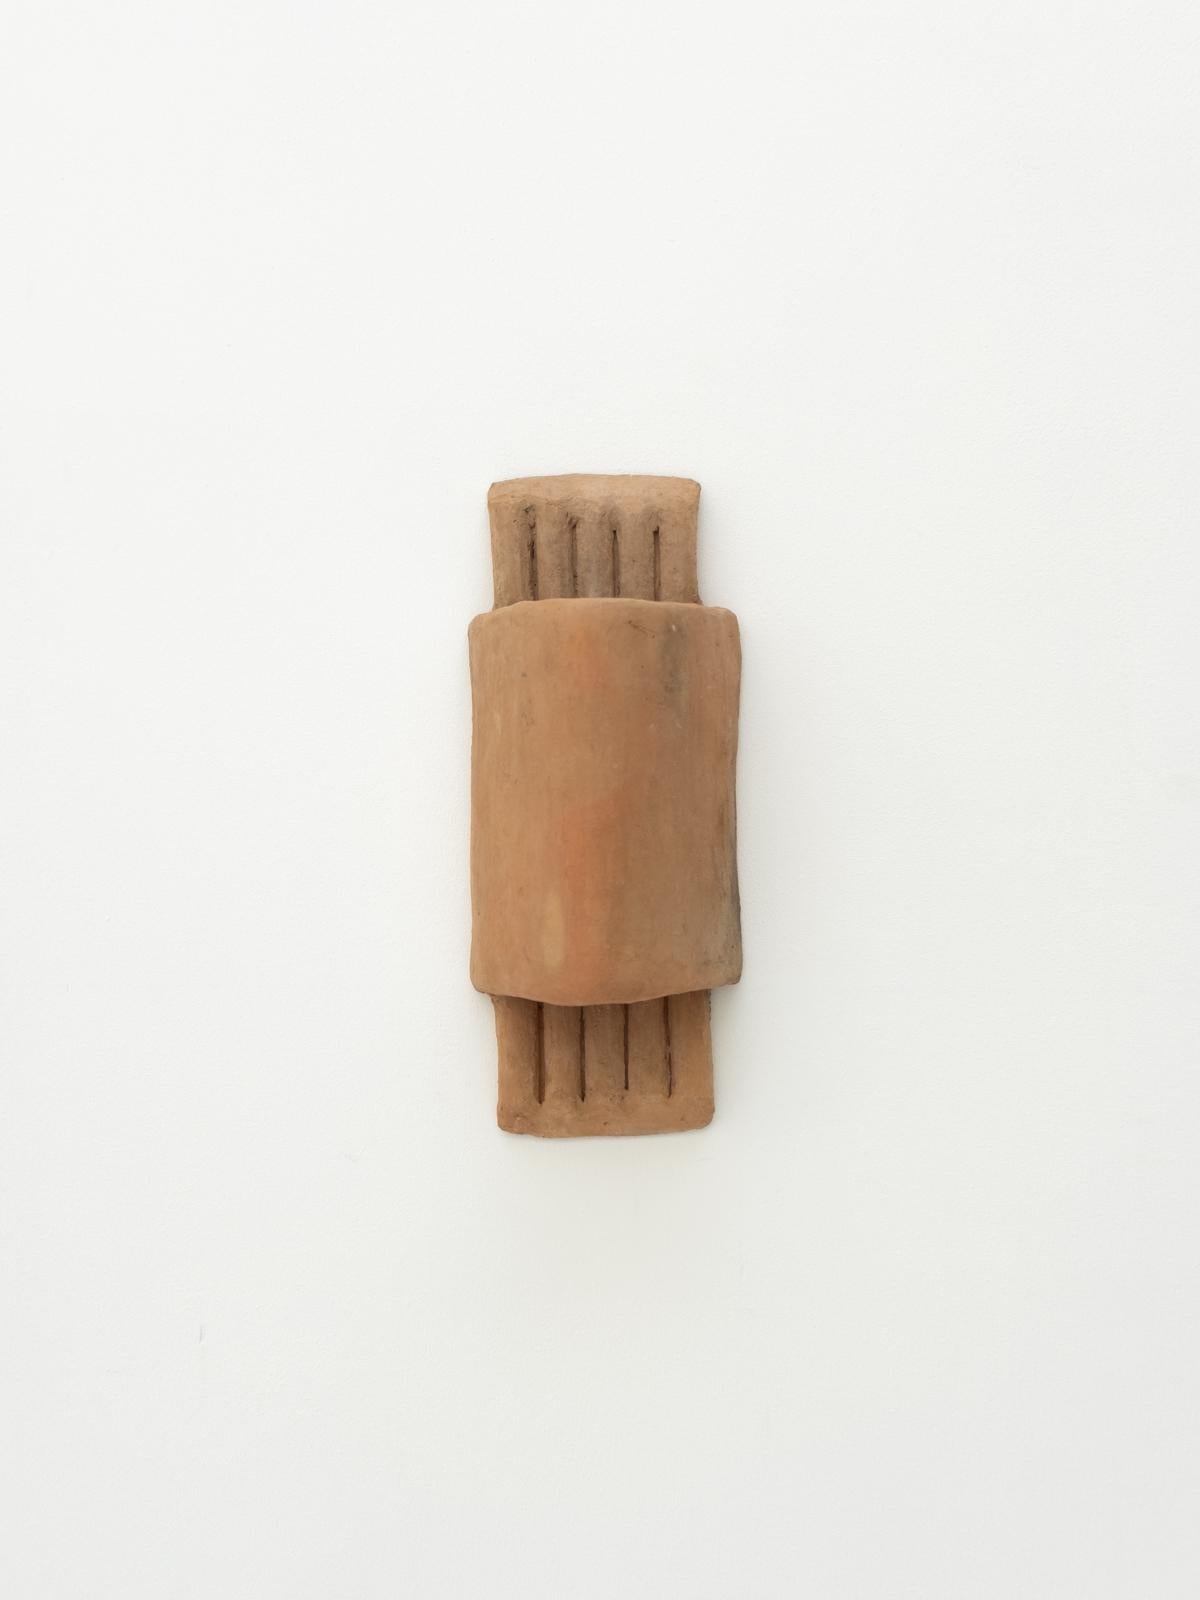 Arts and Crafts Terracotta contemporary Ceramic Wall Light Made of local Clay, handcrafted For Sale